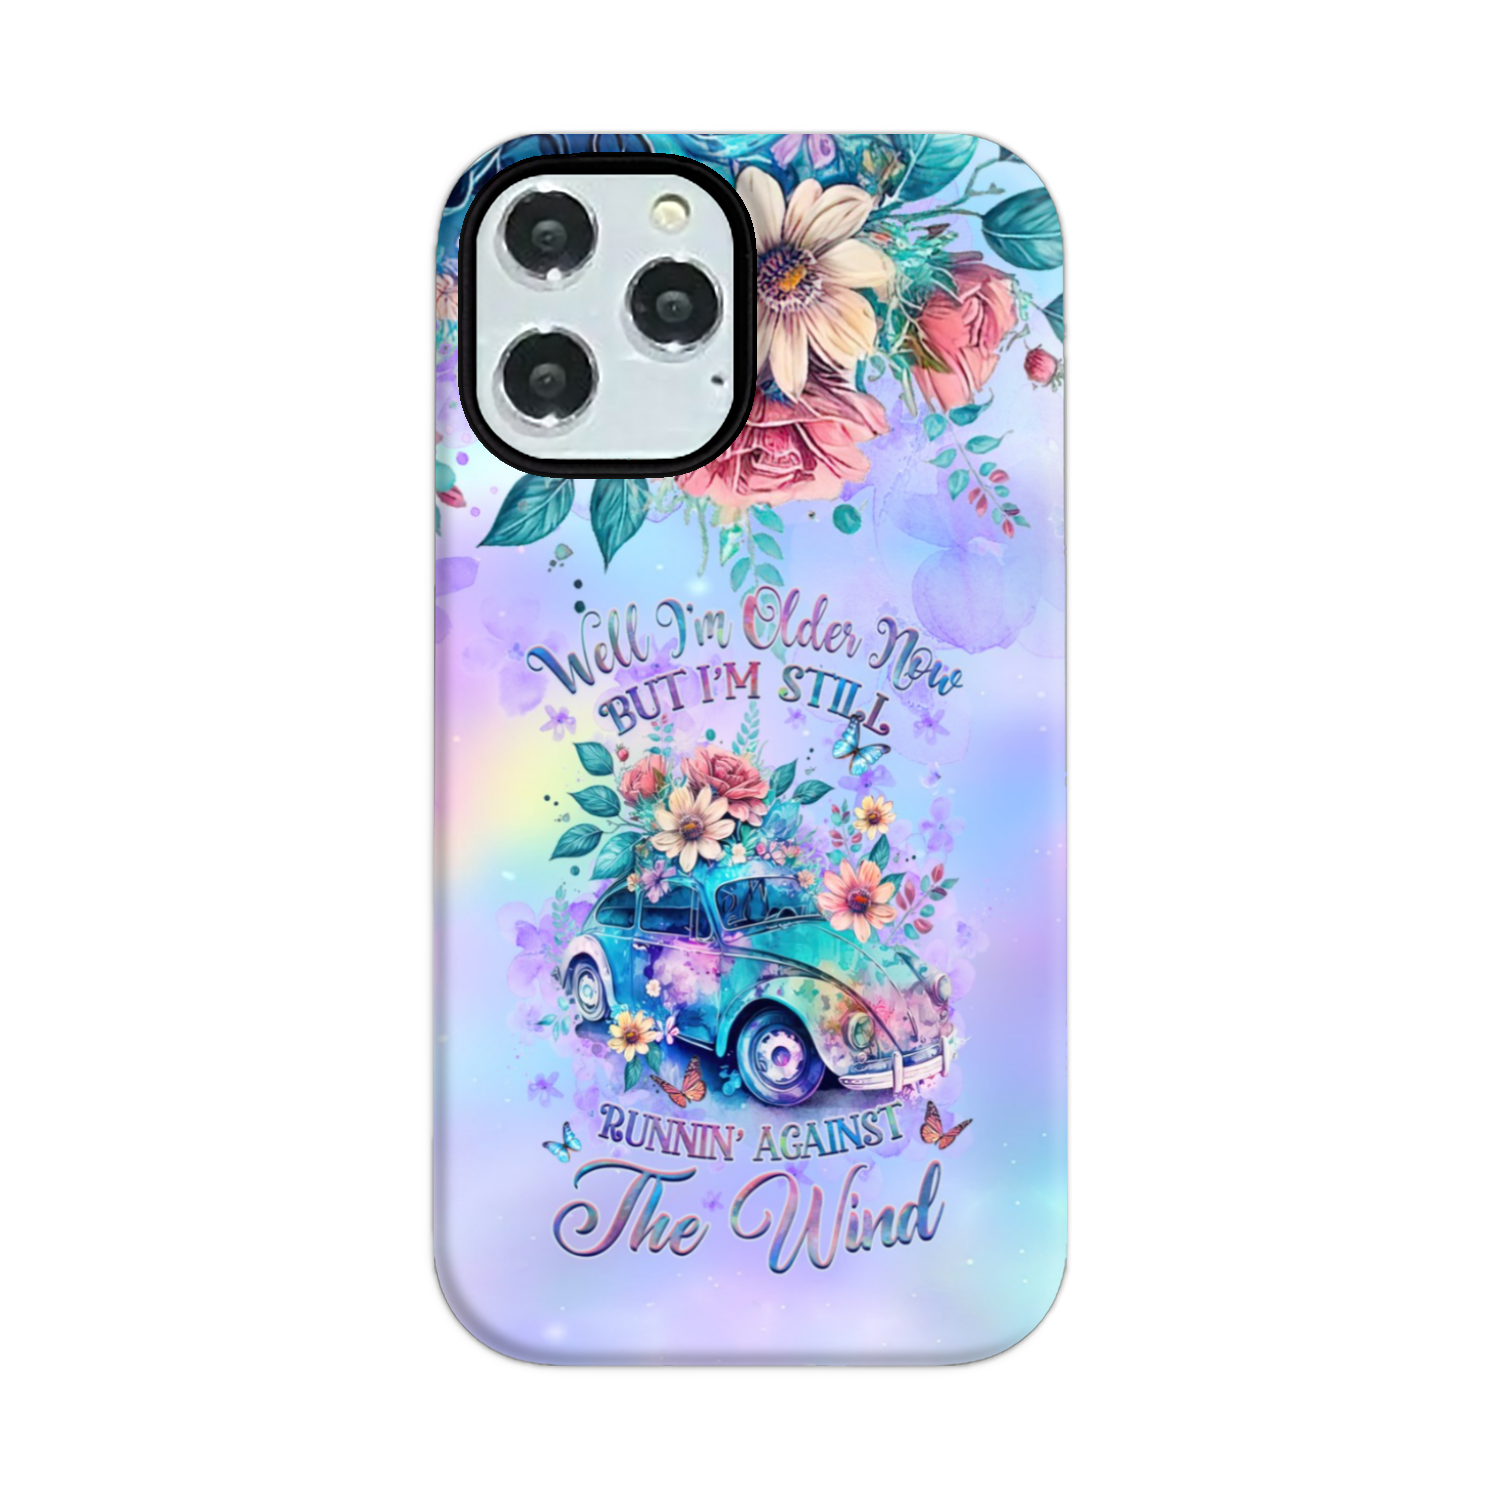 RUNNING AGAINST THE WIND PHONE CASE - YHHG0410232